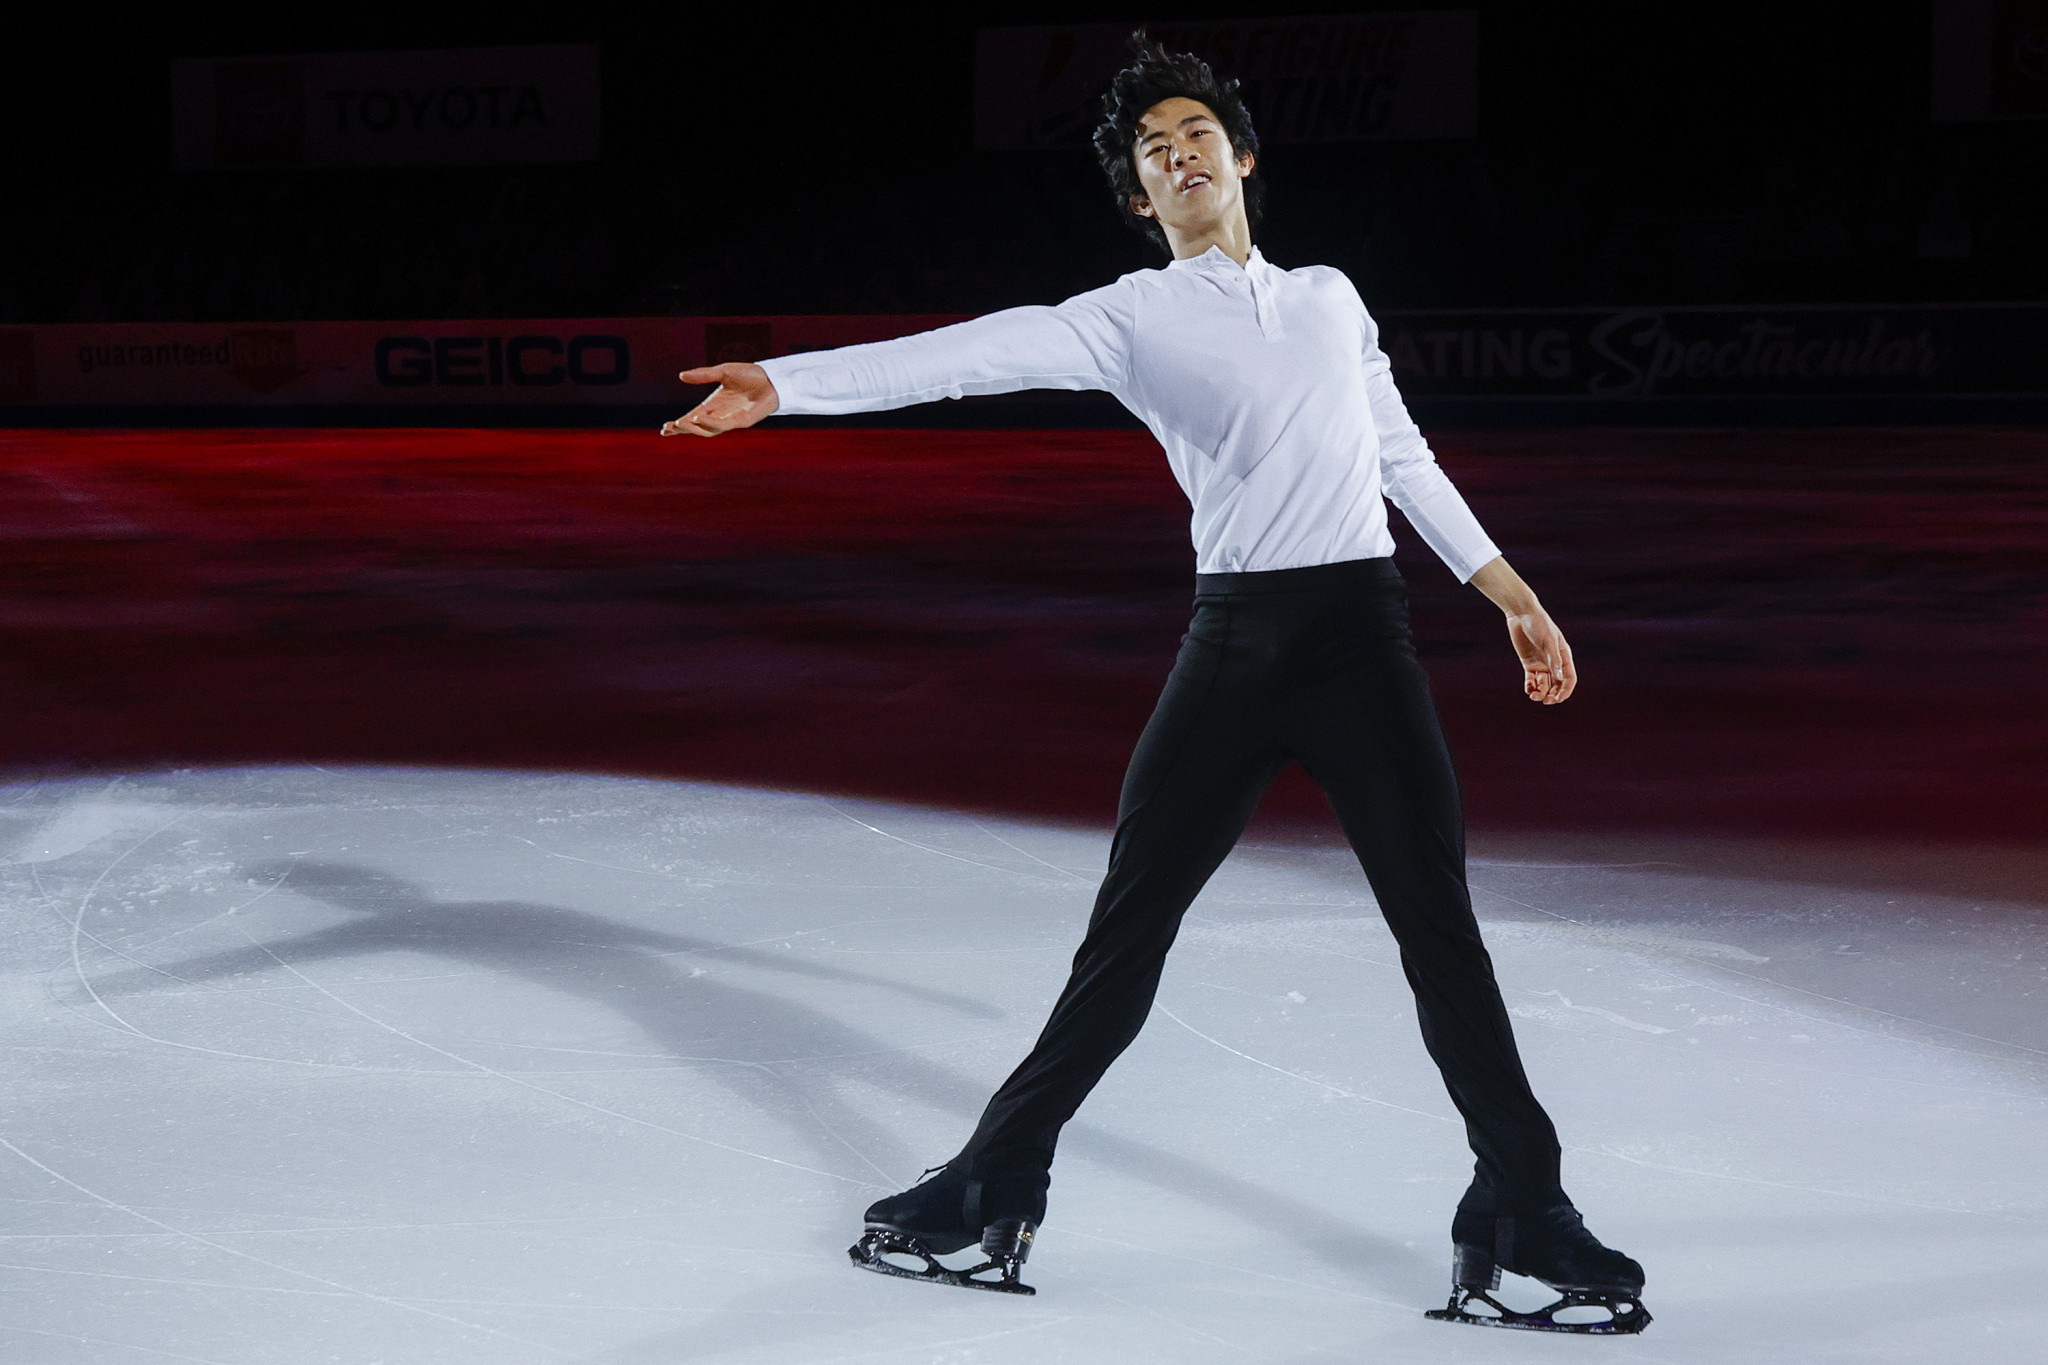 American Olympic medallist Nathan Chen agreed with Evan Bates' comments, but said the Olympic Games helped to raise awareness of human rights concerns ©Getty Images